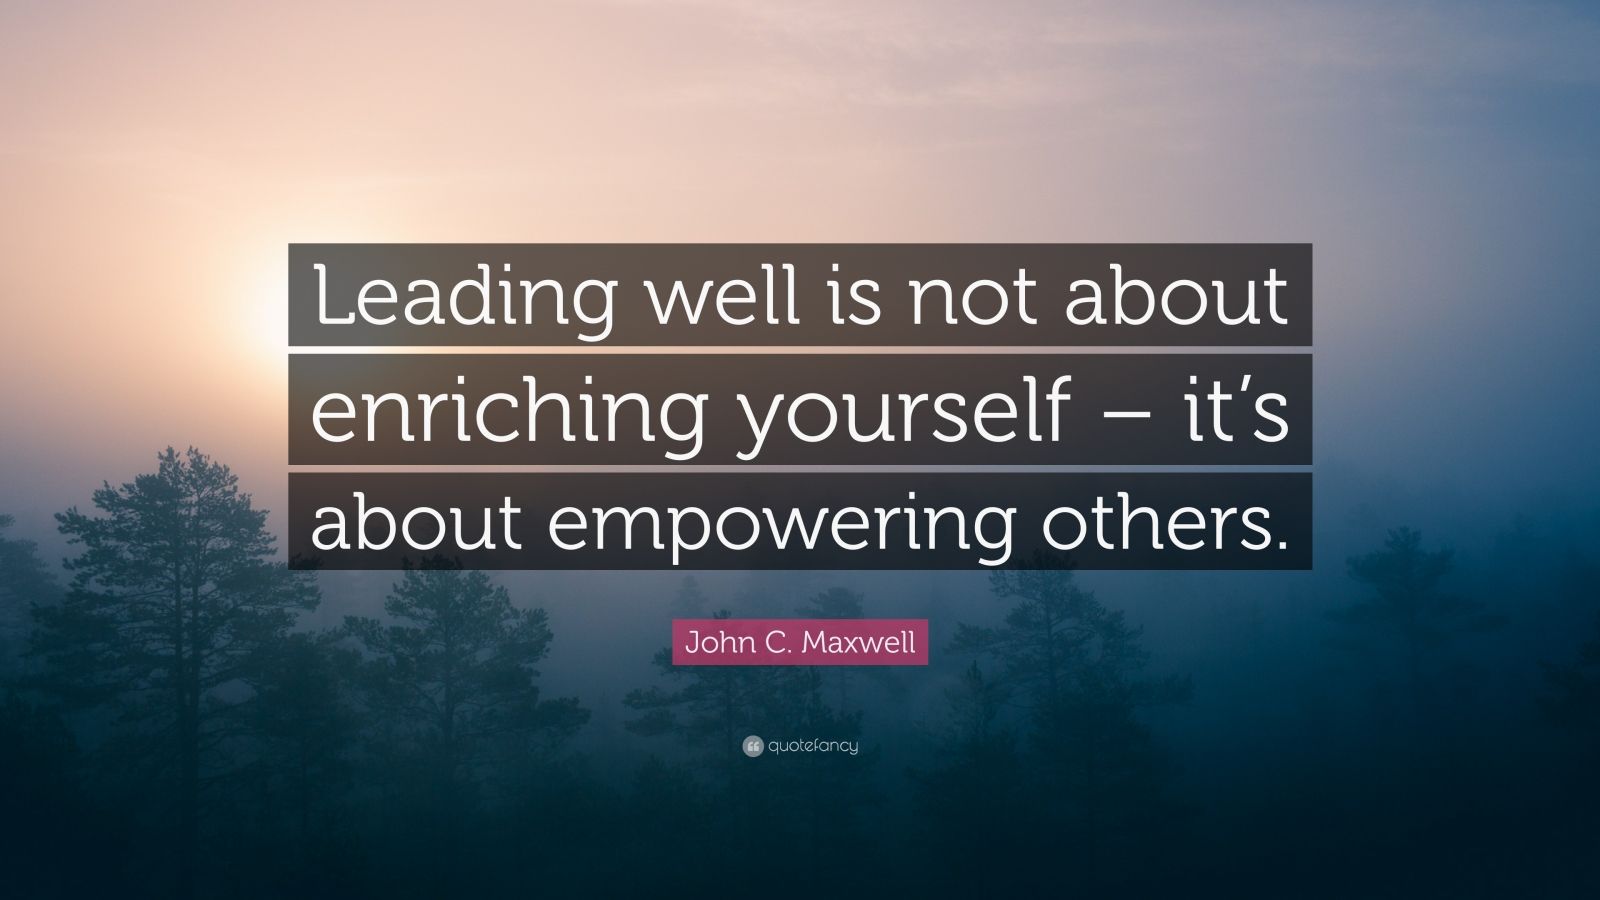 John C. Maxwell Quote: “Leading well is not about enriching yourself